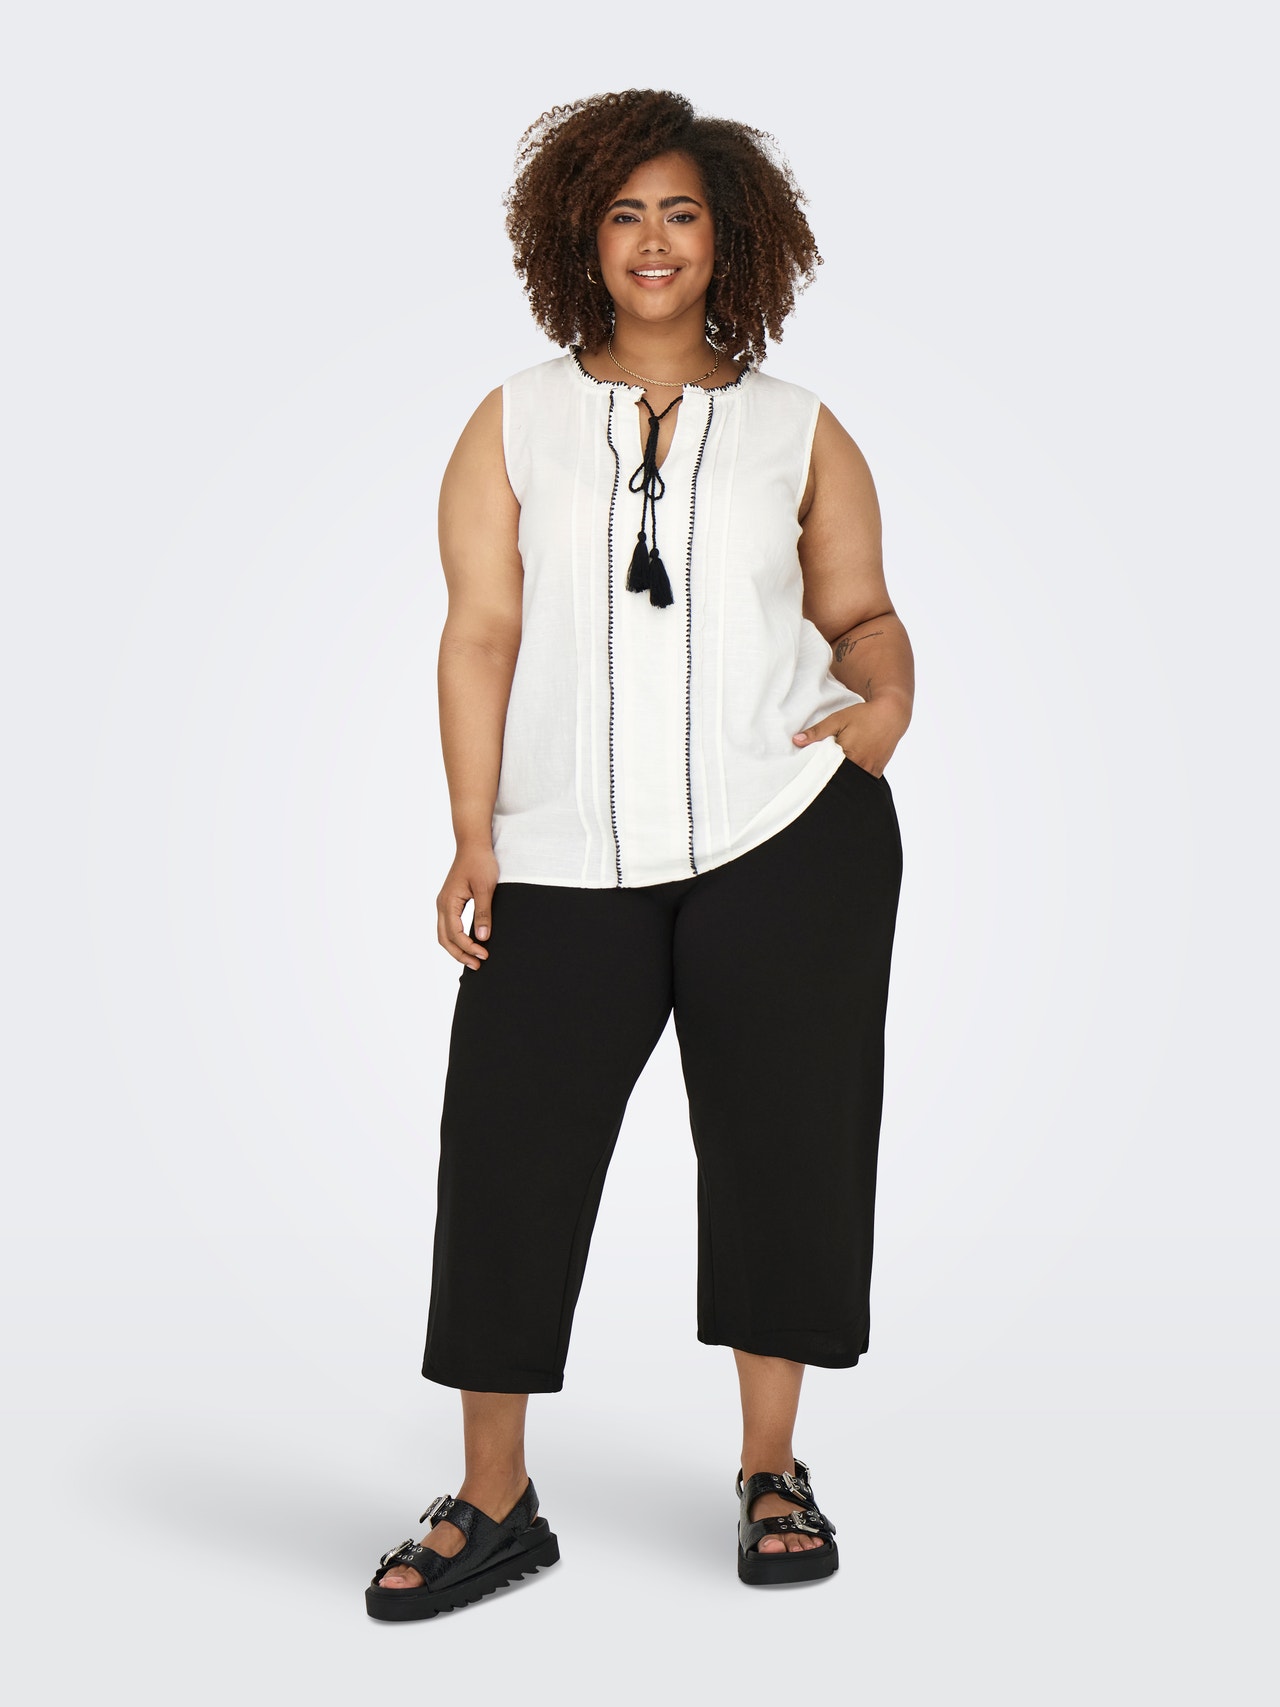 ONLY Curvy culotte trousers -Black - 15320125